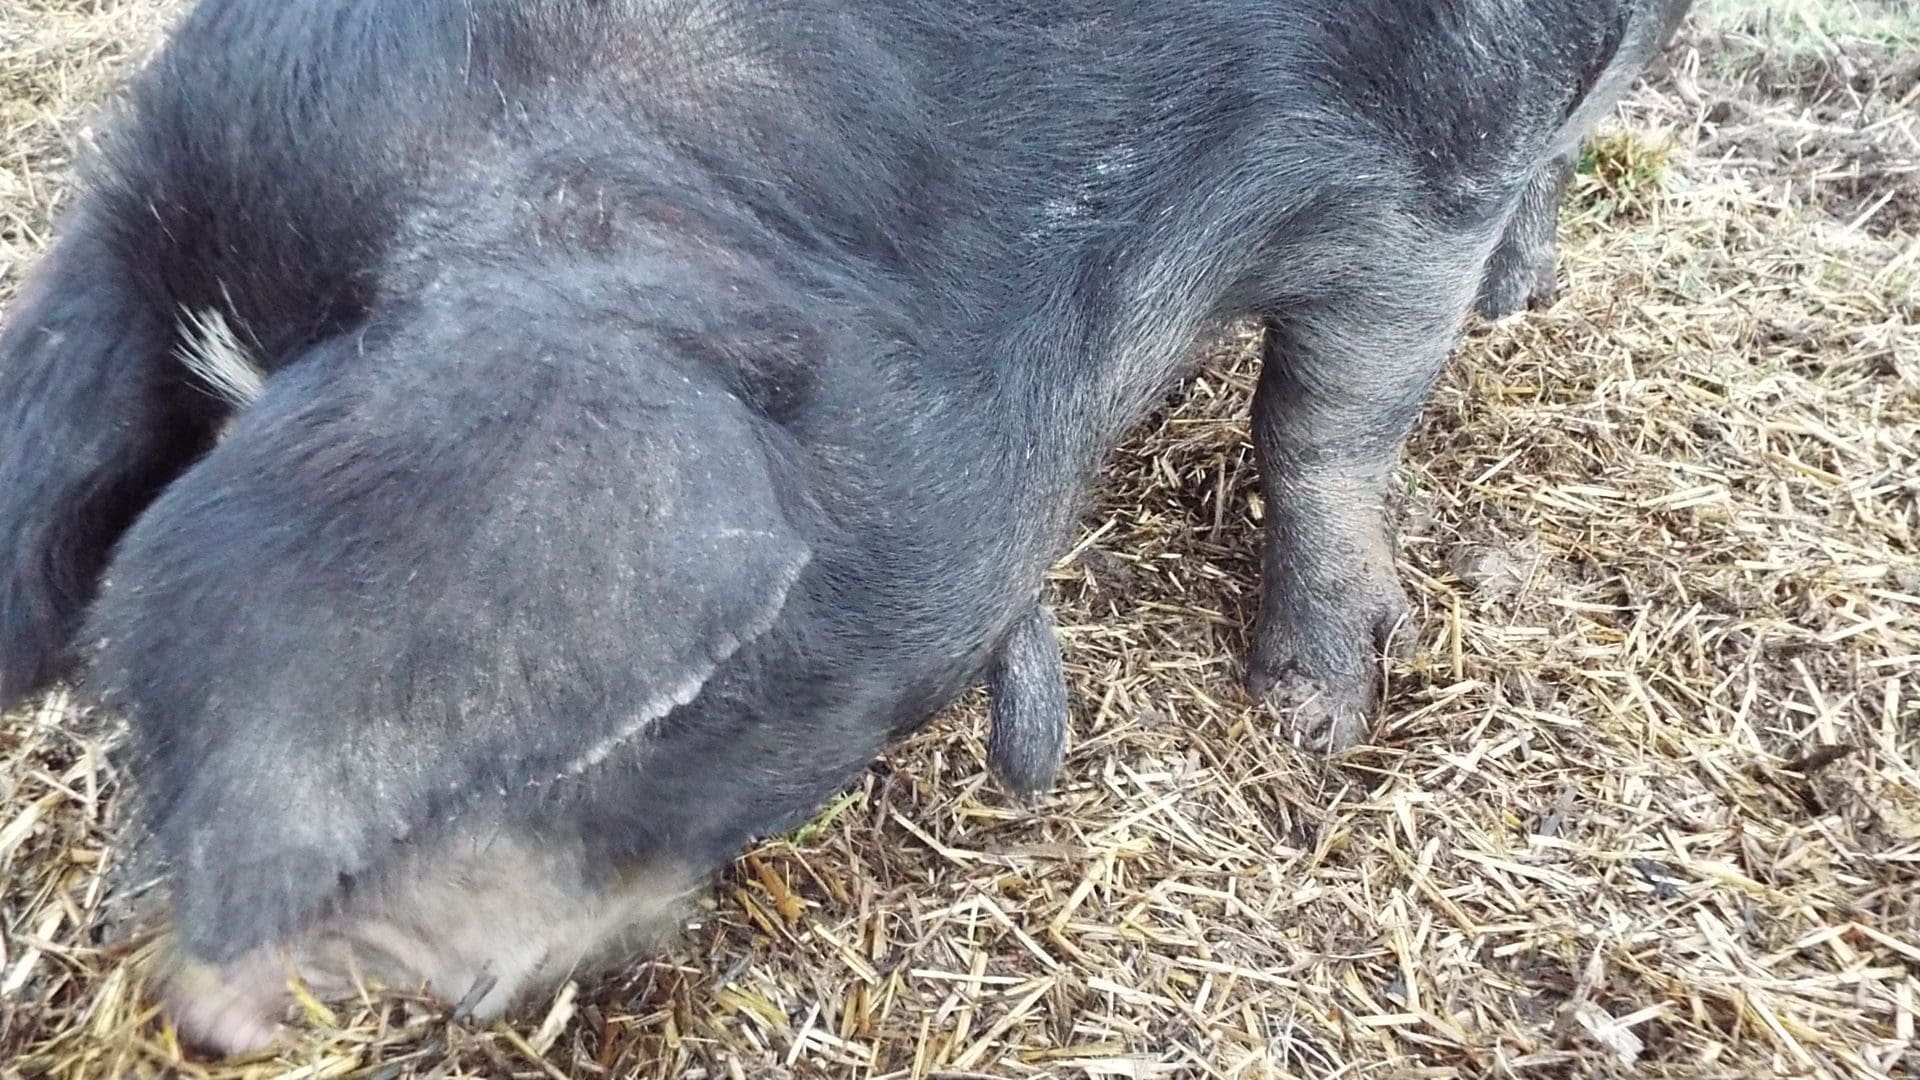 The wattle trait doesn't pass on to all offspring, but this sow is an F1 cross between Red Wattle and Berkshire.